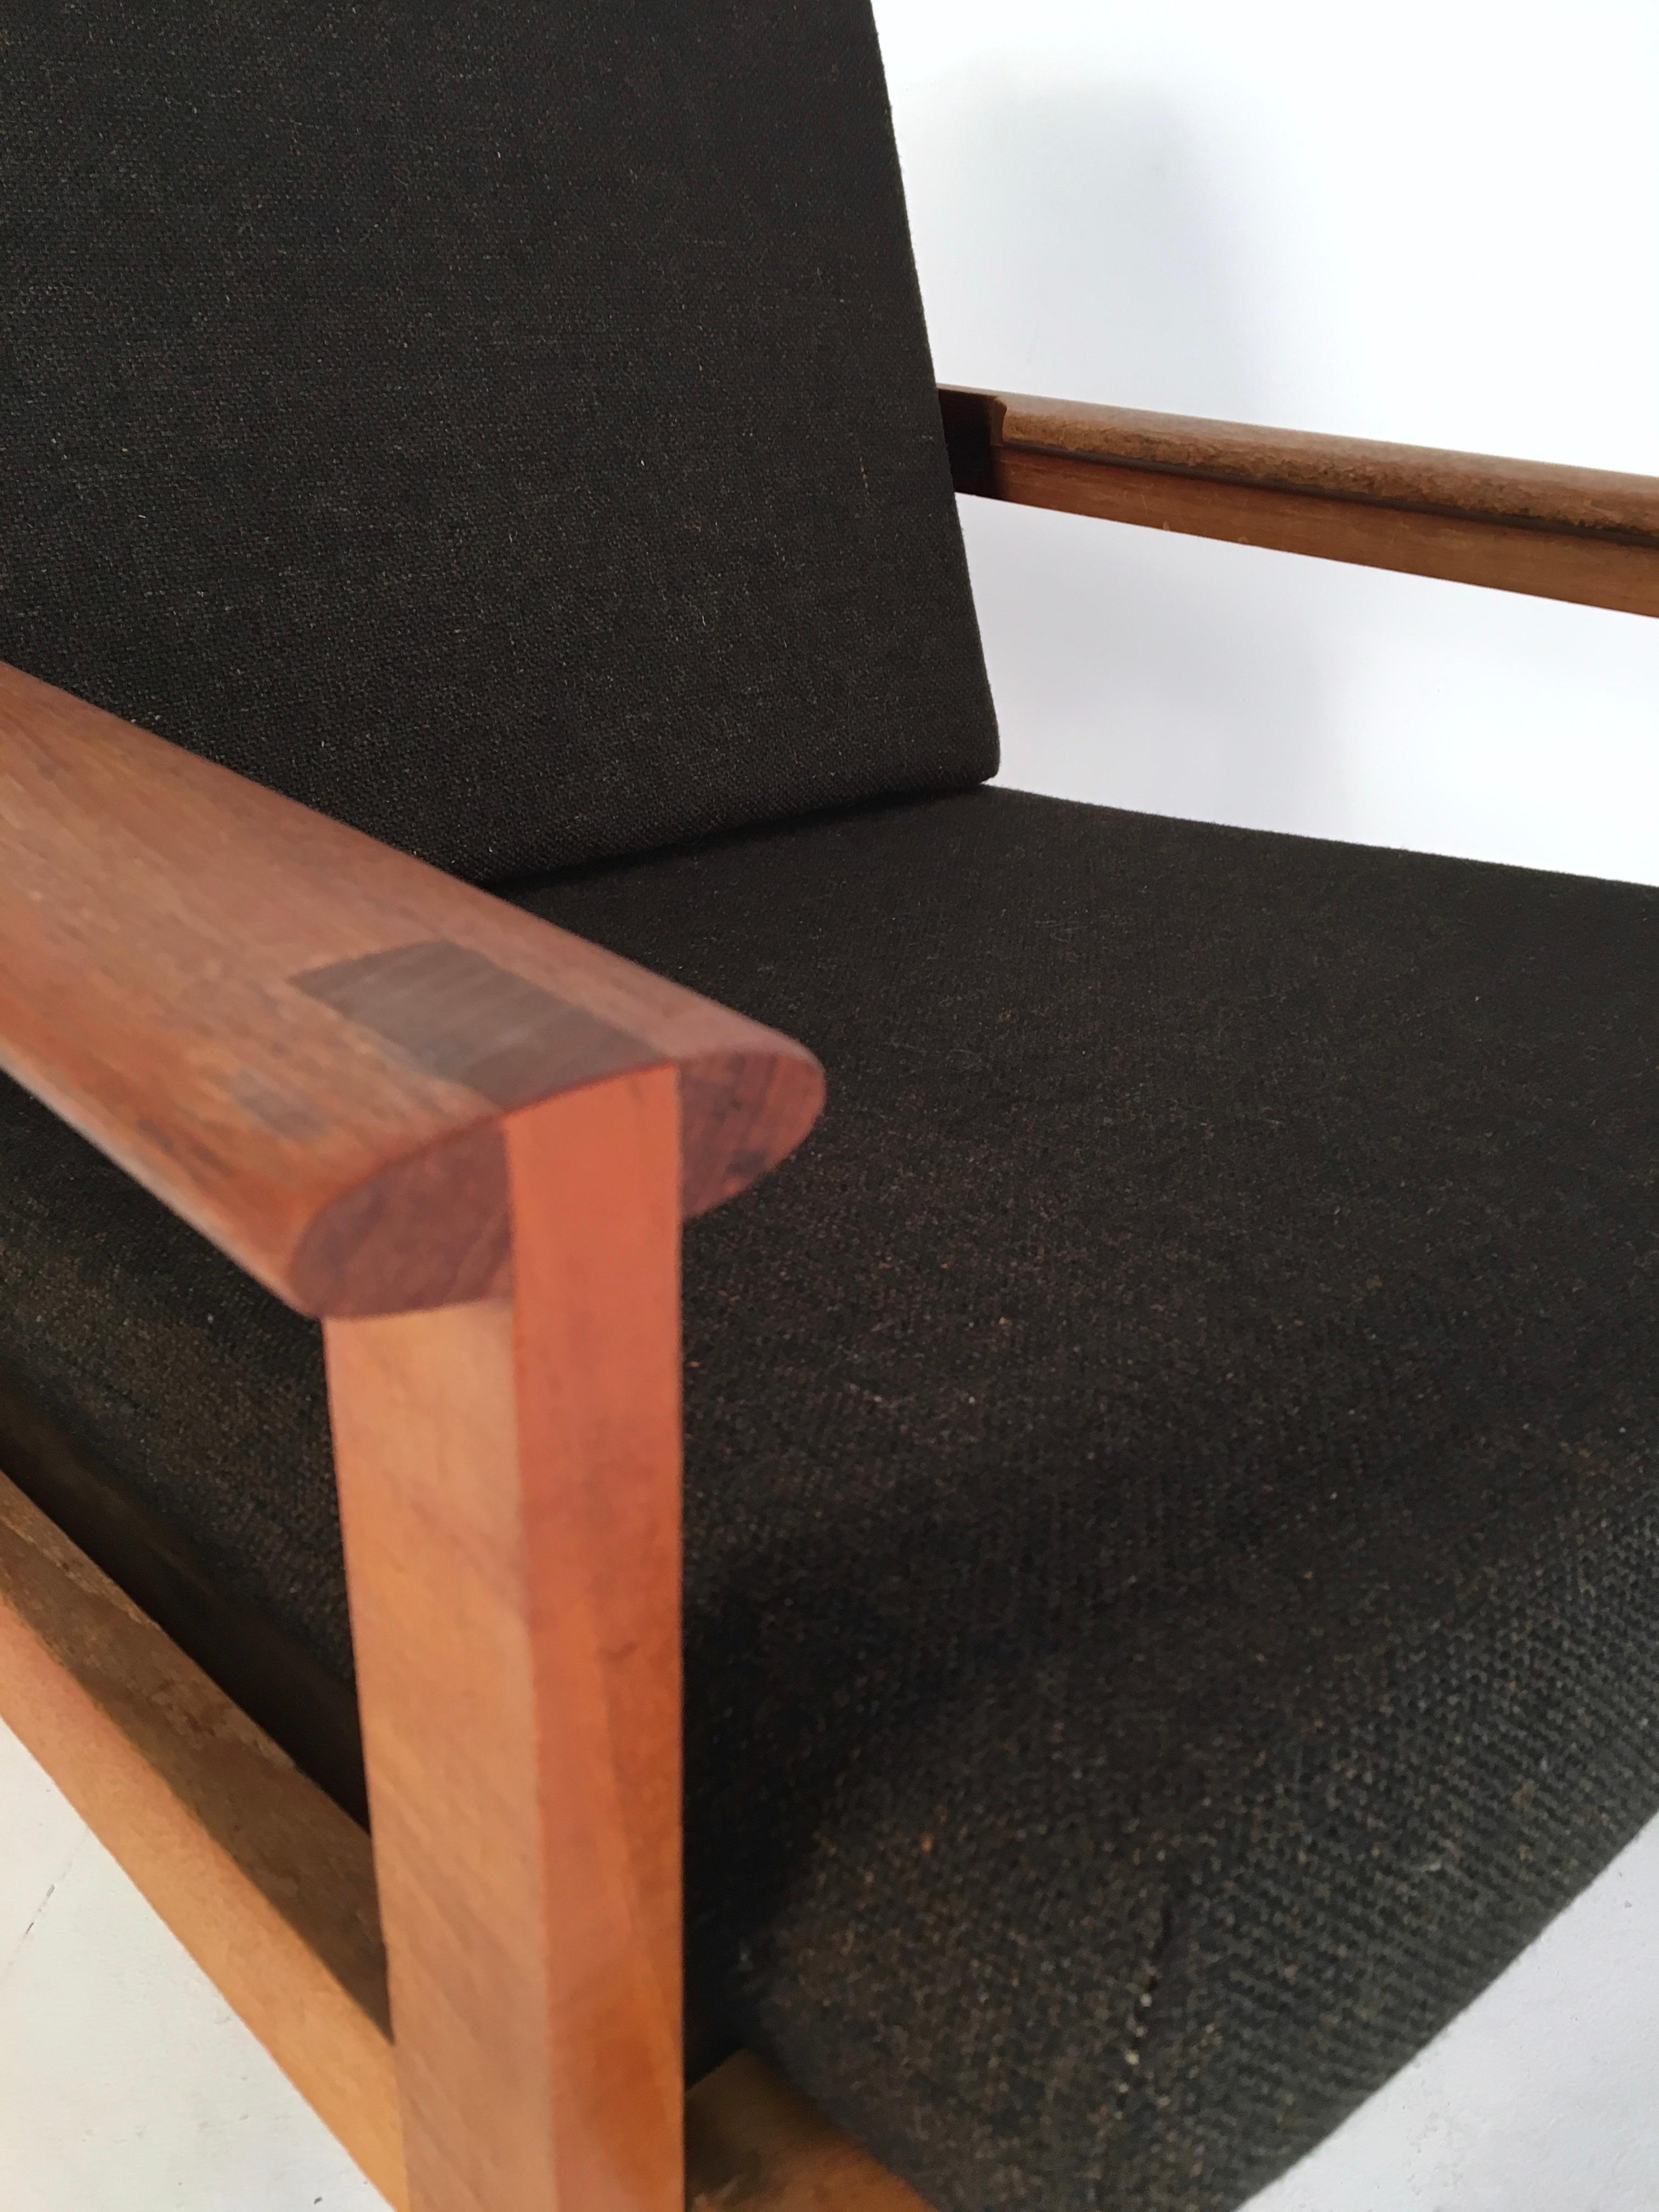 Solid teak lounge chair designed by Illum Wikkelso and produced by N. Eilersen, Denmark, in the 1960's. Upholstered in dark brown tweed.

Good condition for year with superficial scuffs to the frame. The upholstery is immaculate.

Dimensions